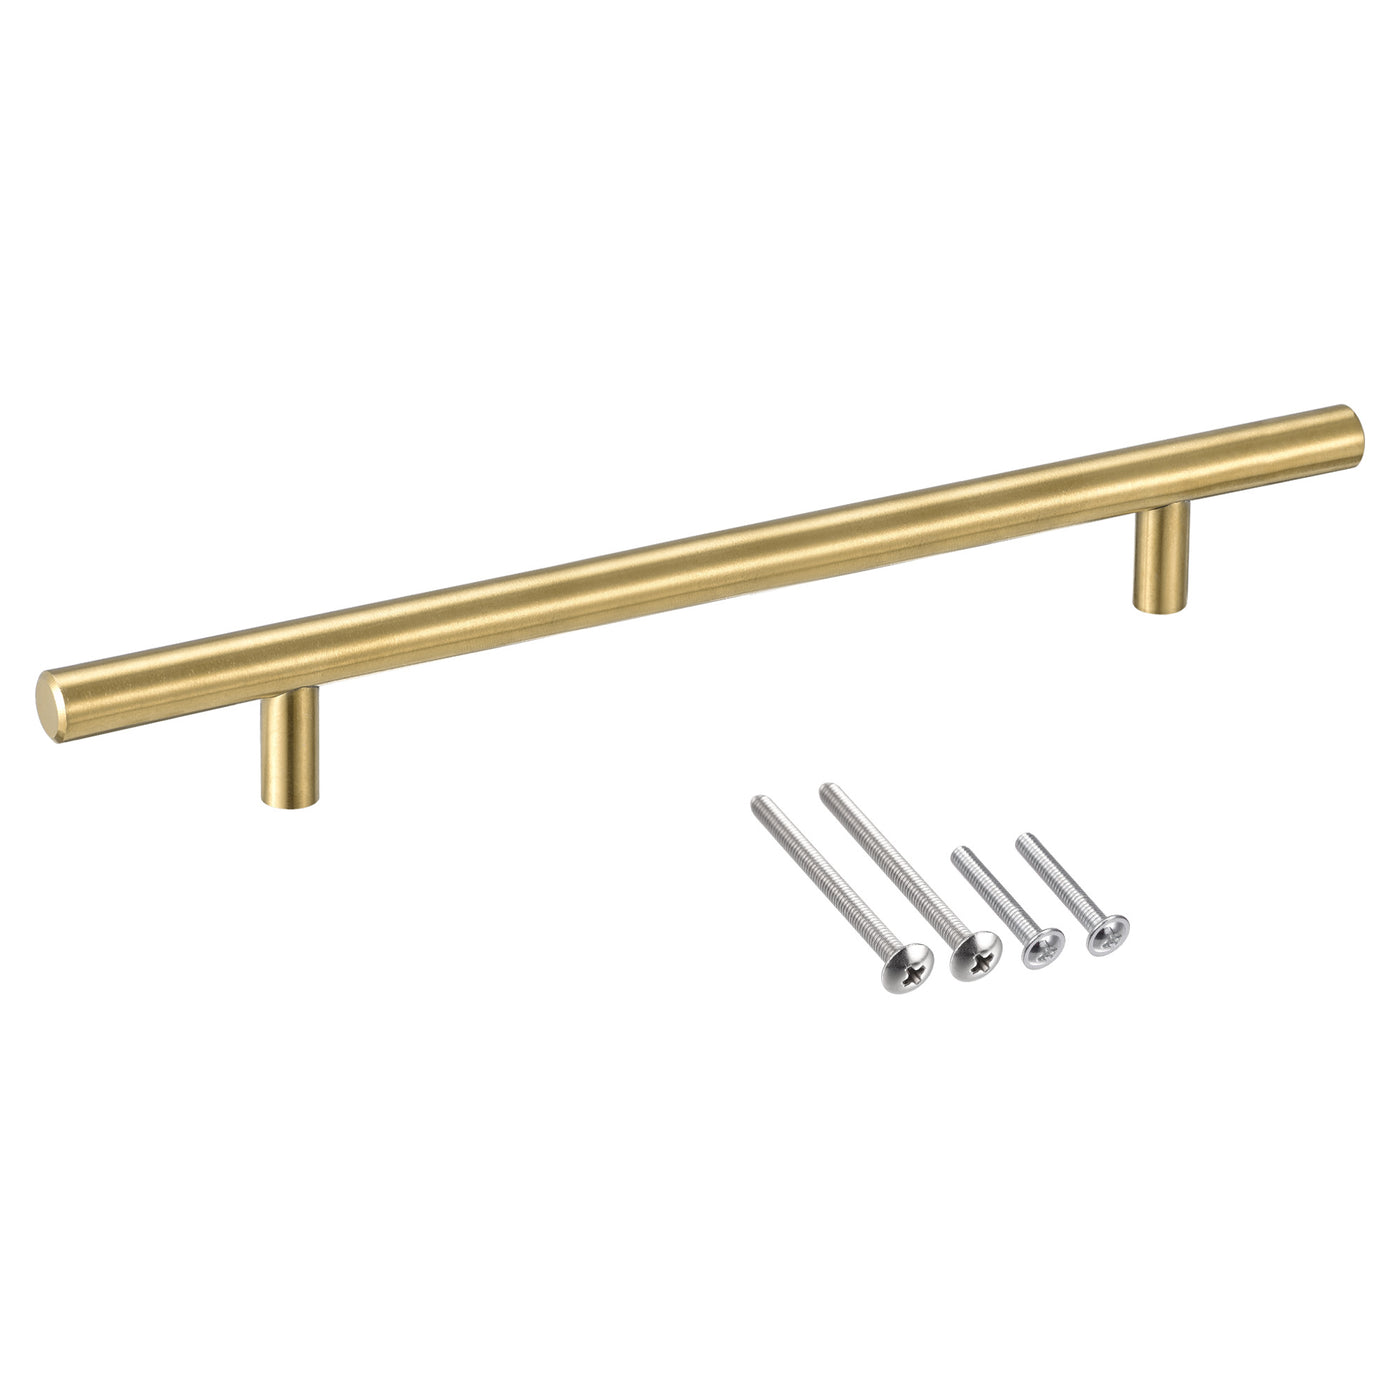 uxcell Uxcell T Bar Pull Handle, 12"(300mm) Length 12mm Dia Stainless Steel Cabinet Pulls 7.6"(192mm) Hole Center Distance Gold Tone